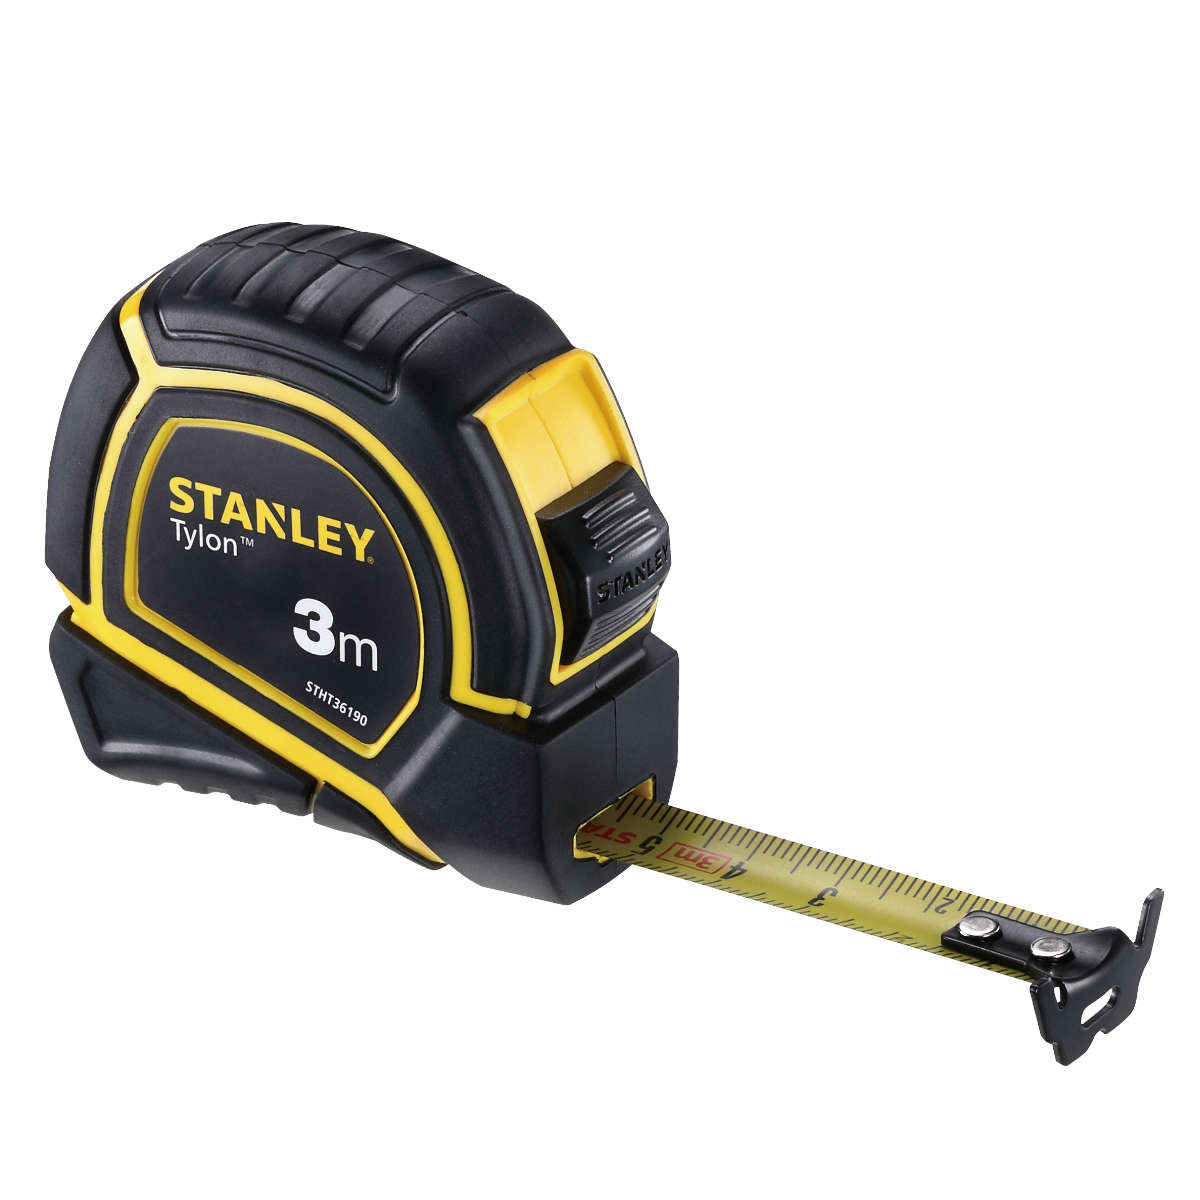 Stanley Tylon Tape Measure ( Select Size ) Power Tool Services